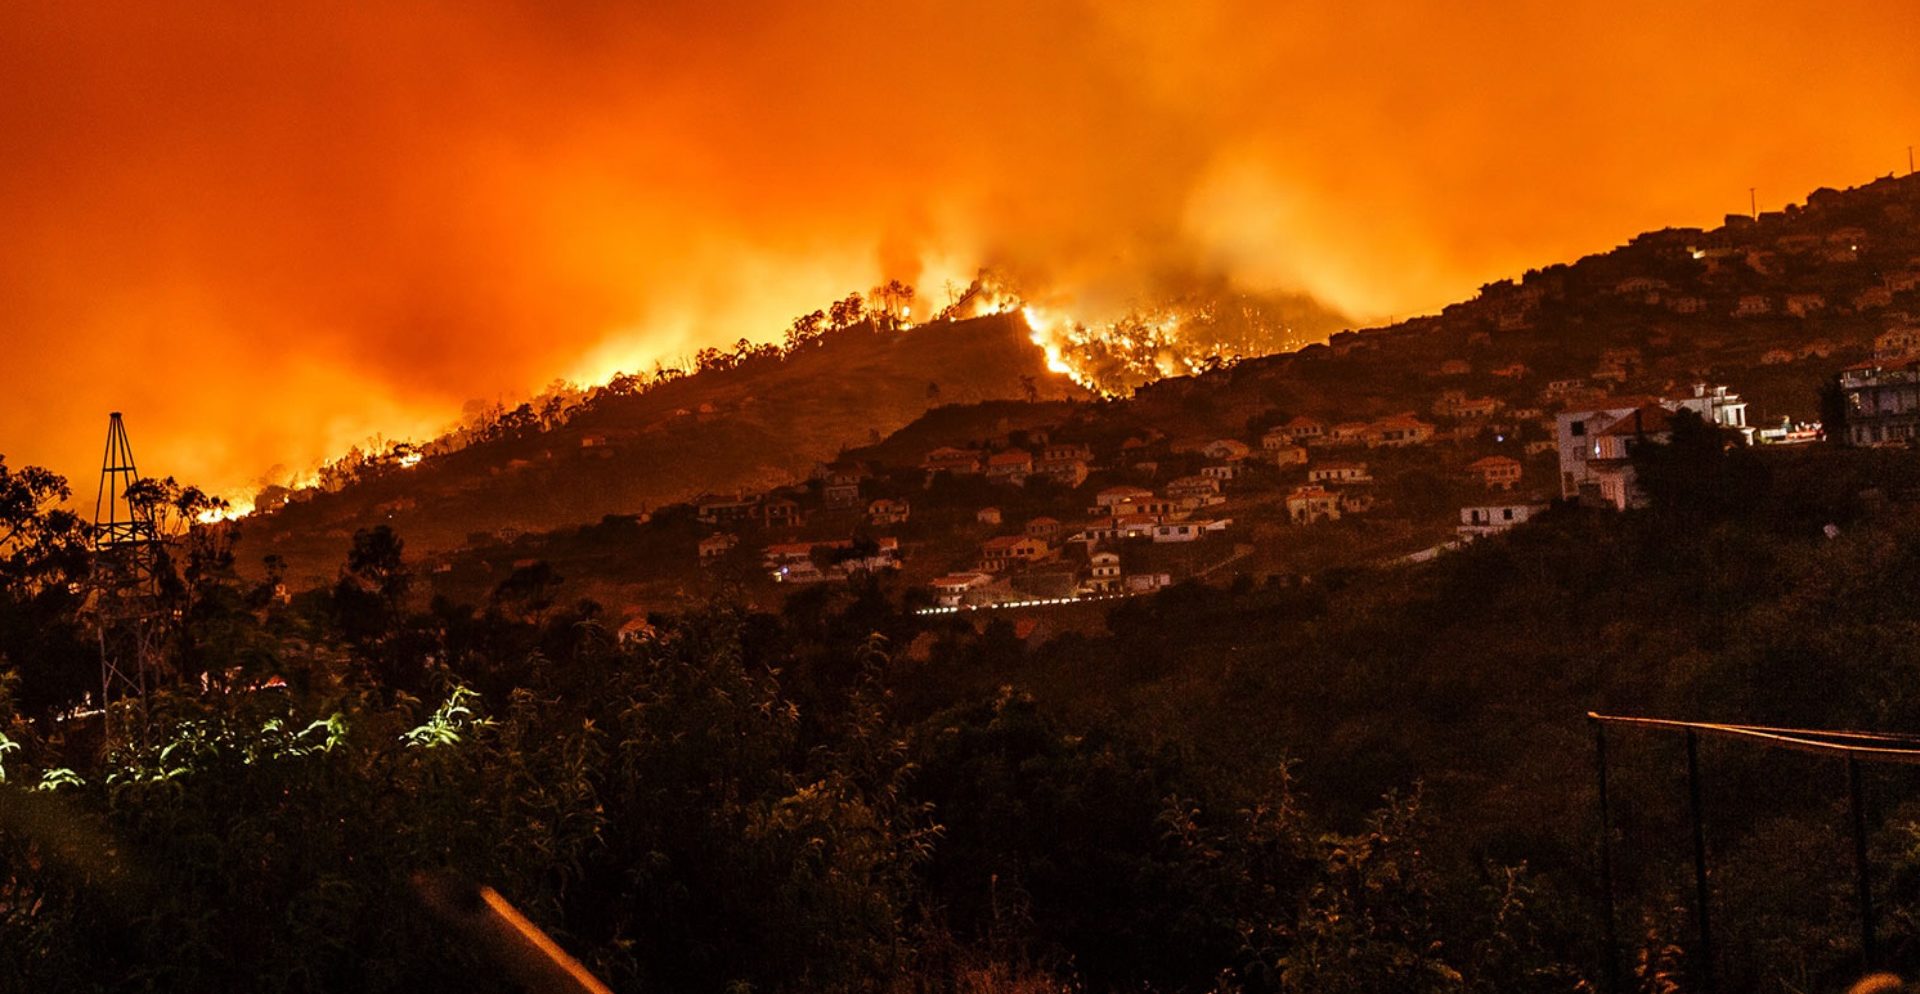 Photograph of a mountain wildfire consuming homes